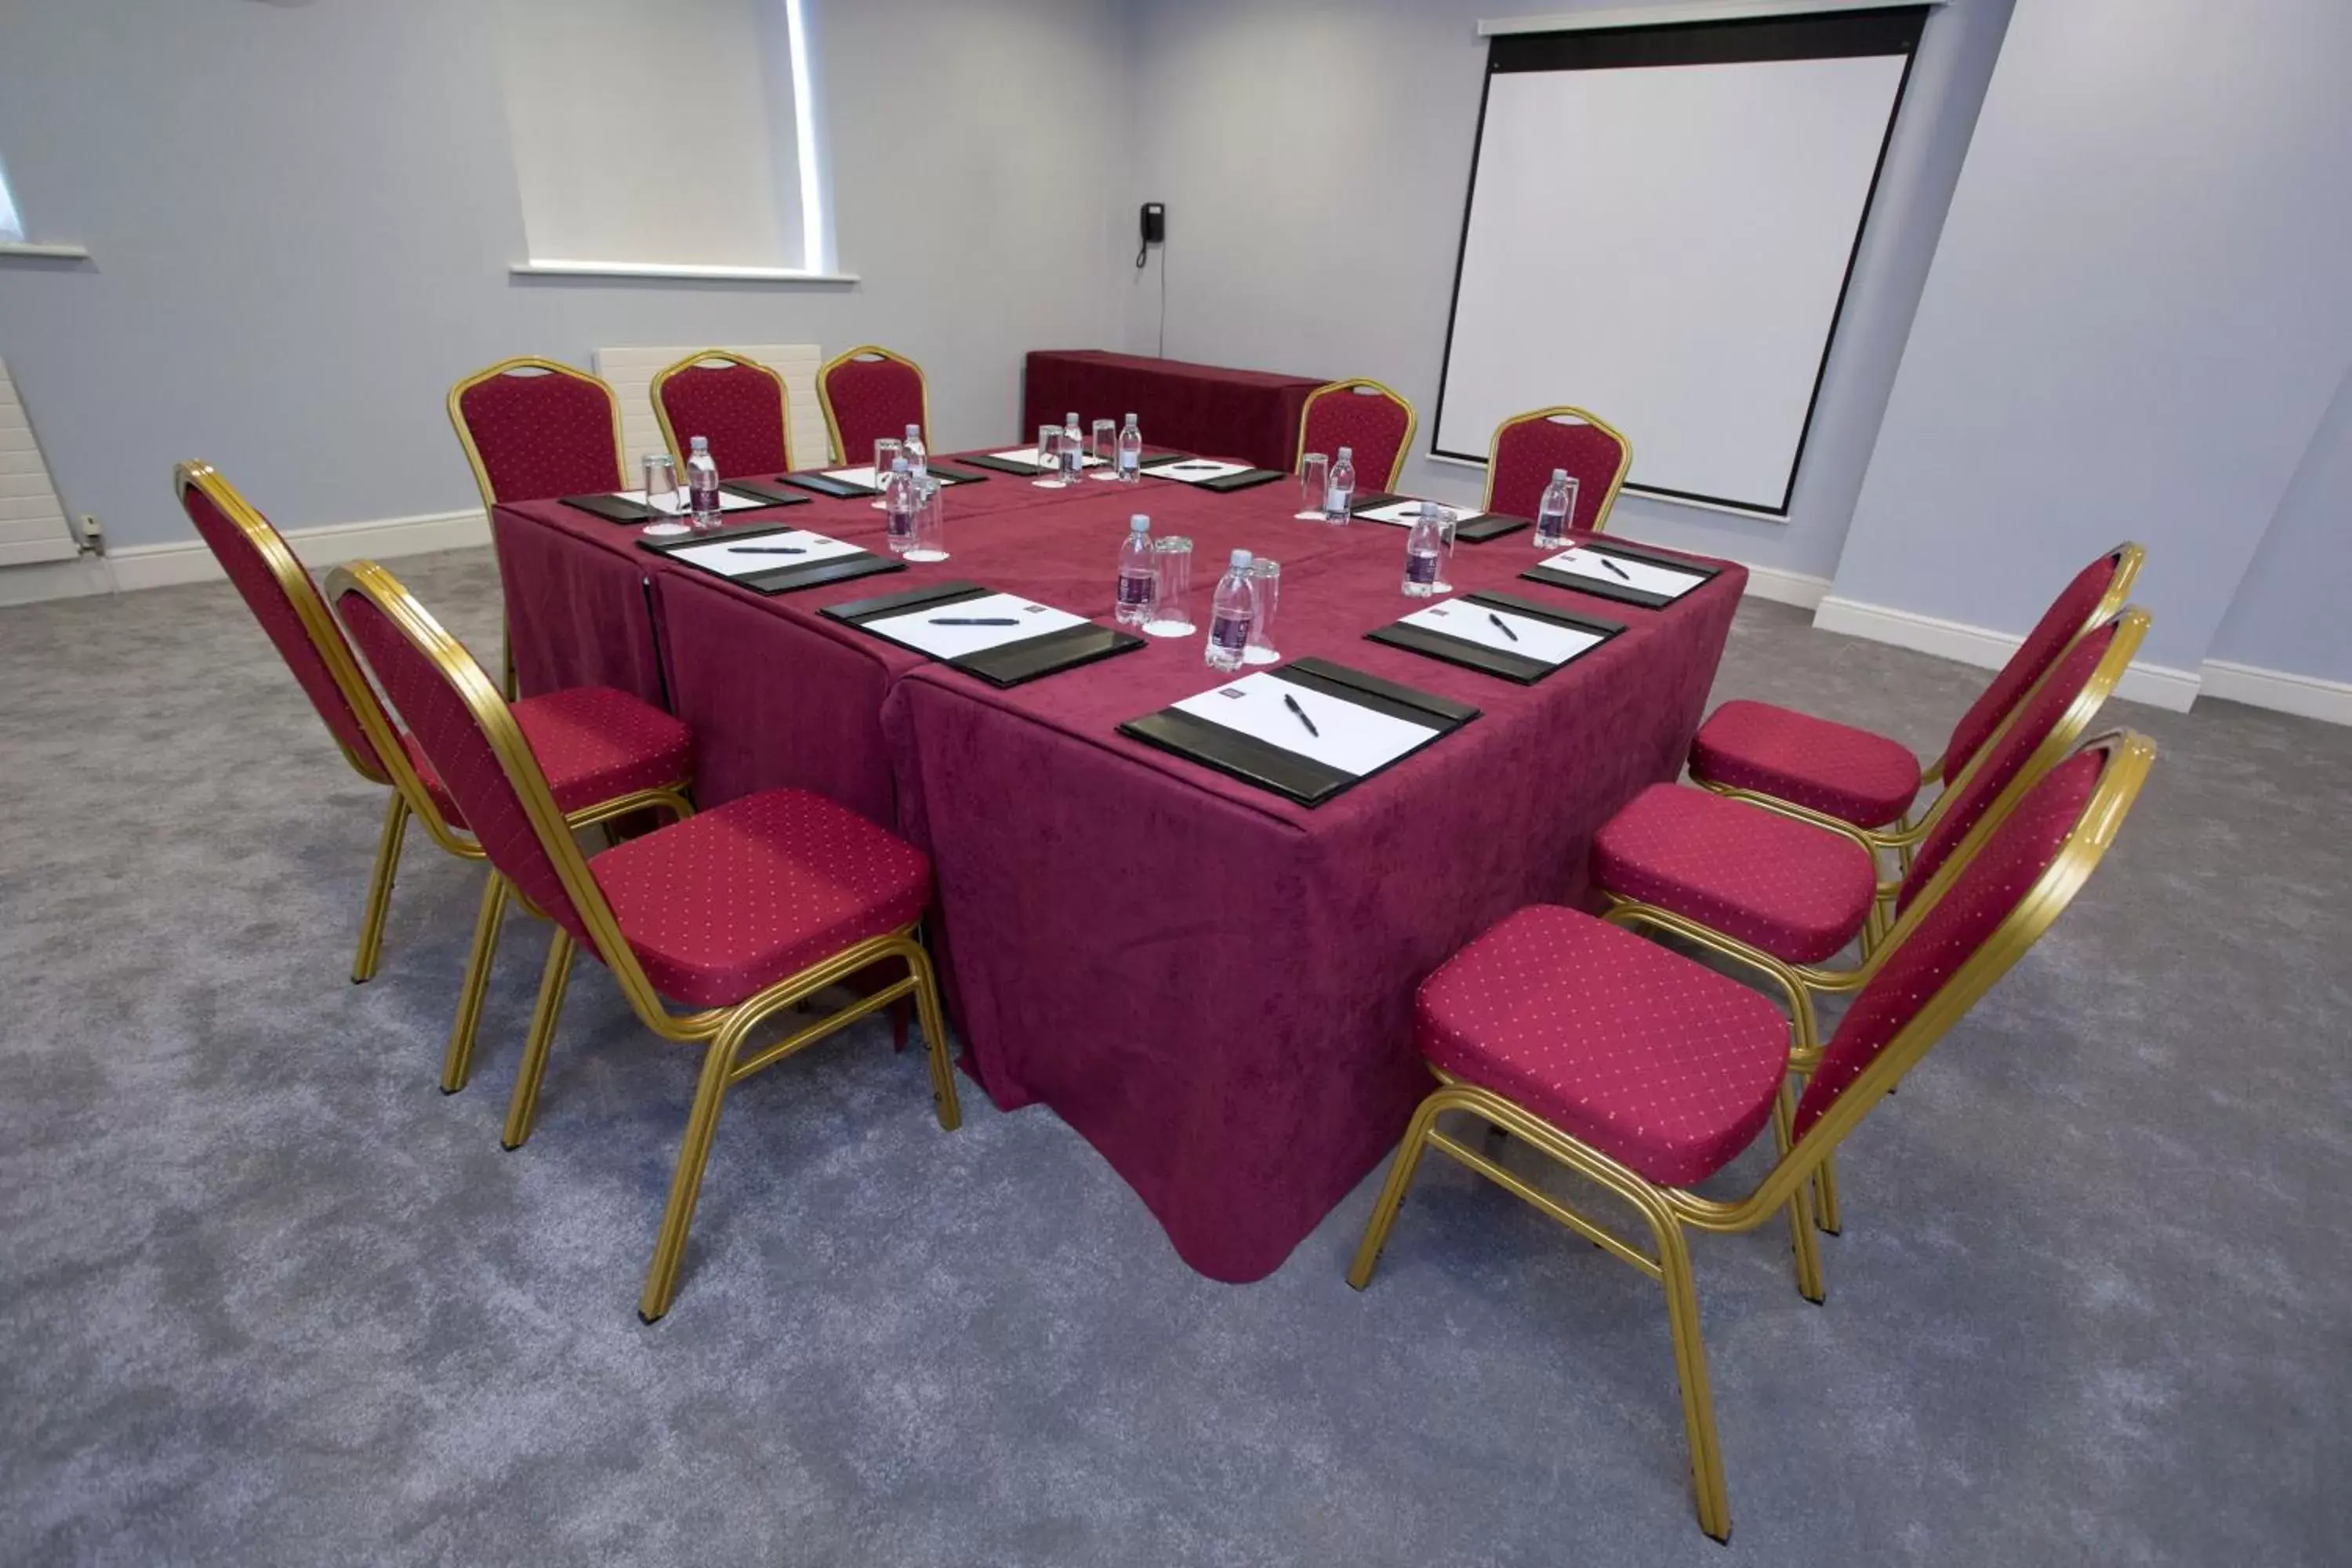 Meeting/conference room in Clybaun Hotel